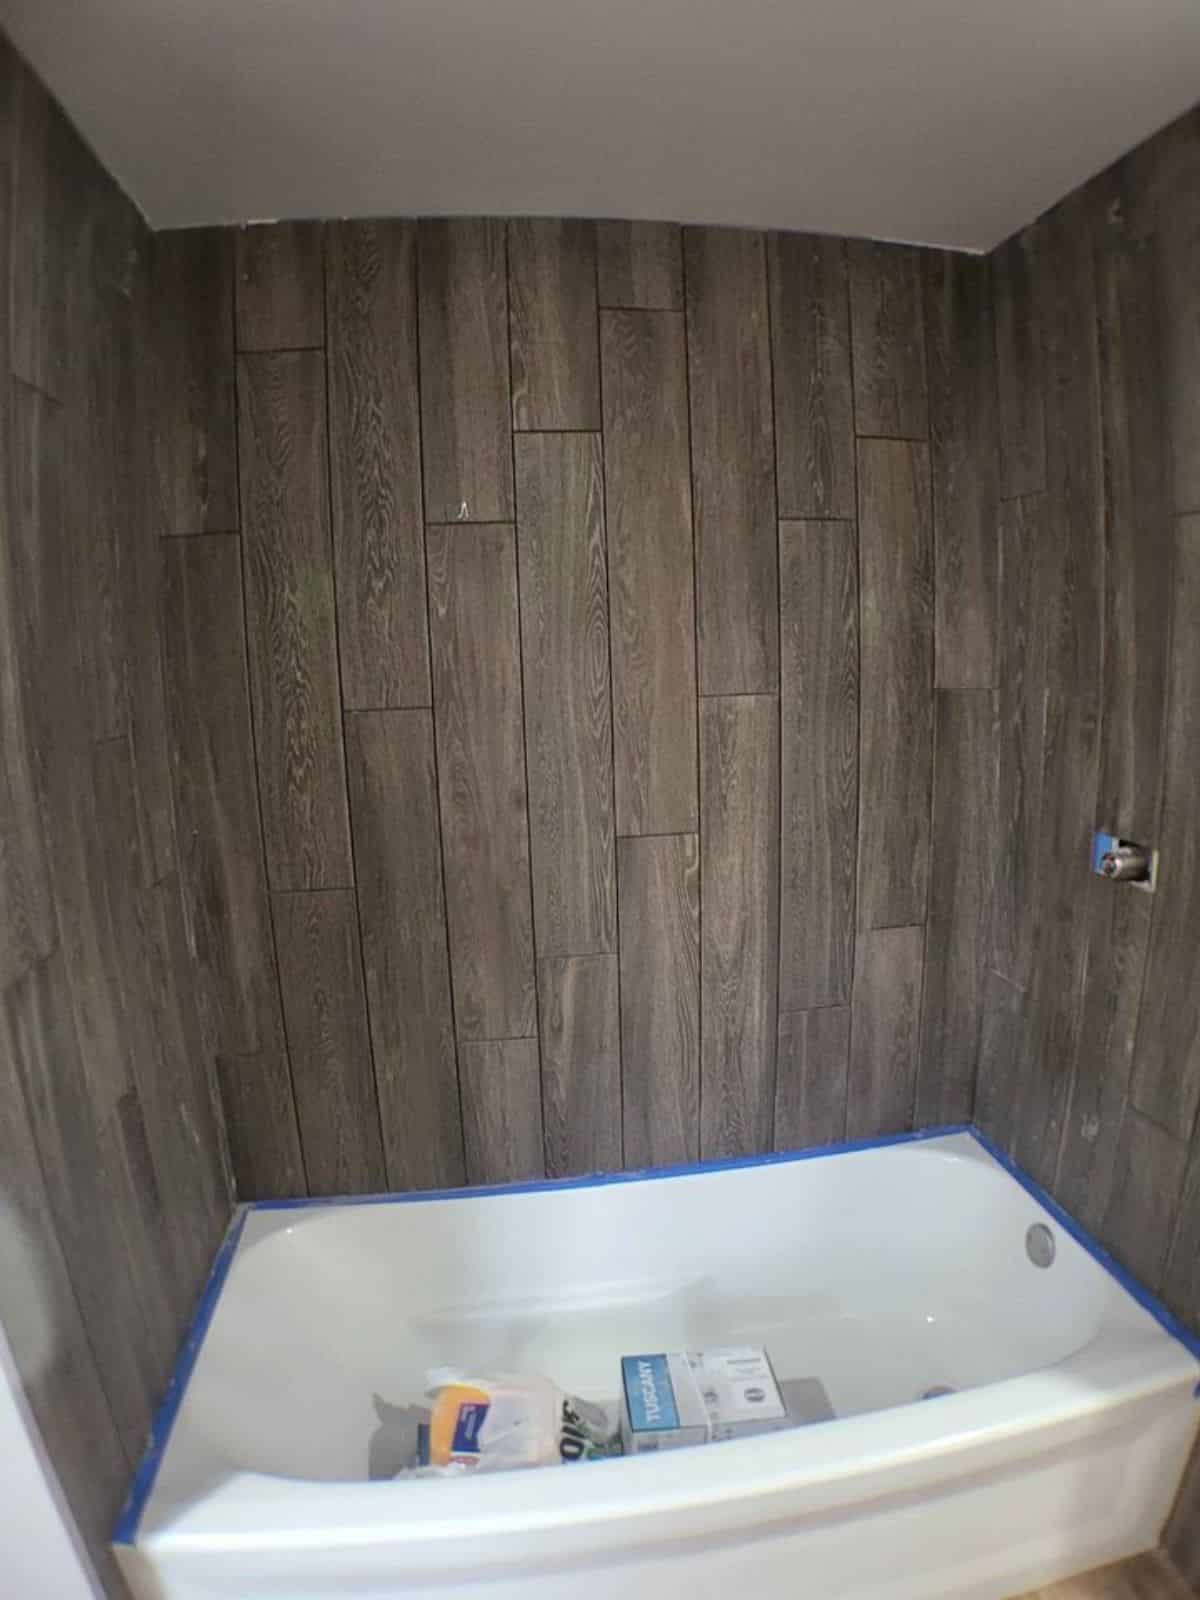 bathtub for shower included in the bathroom